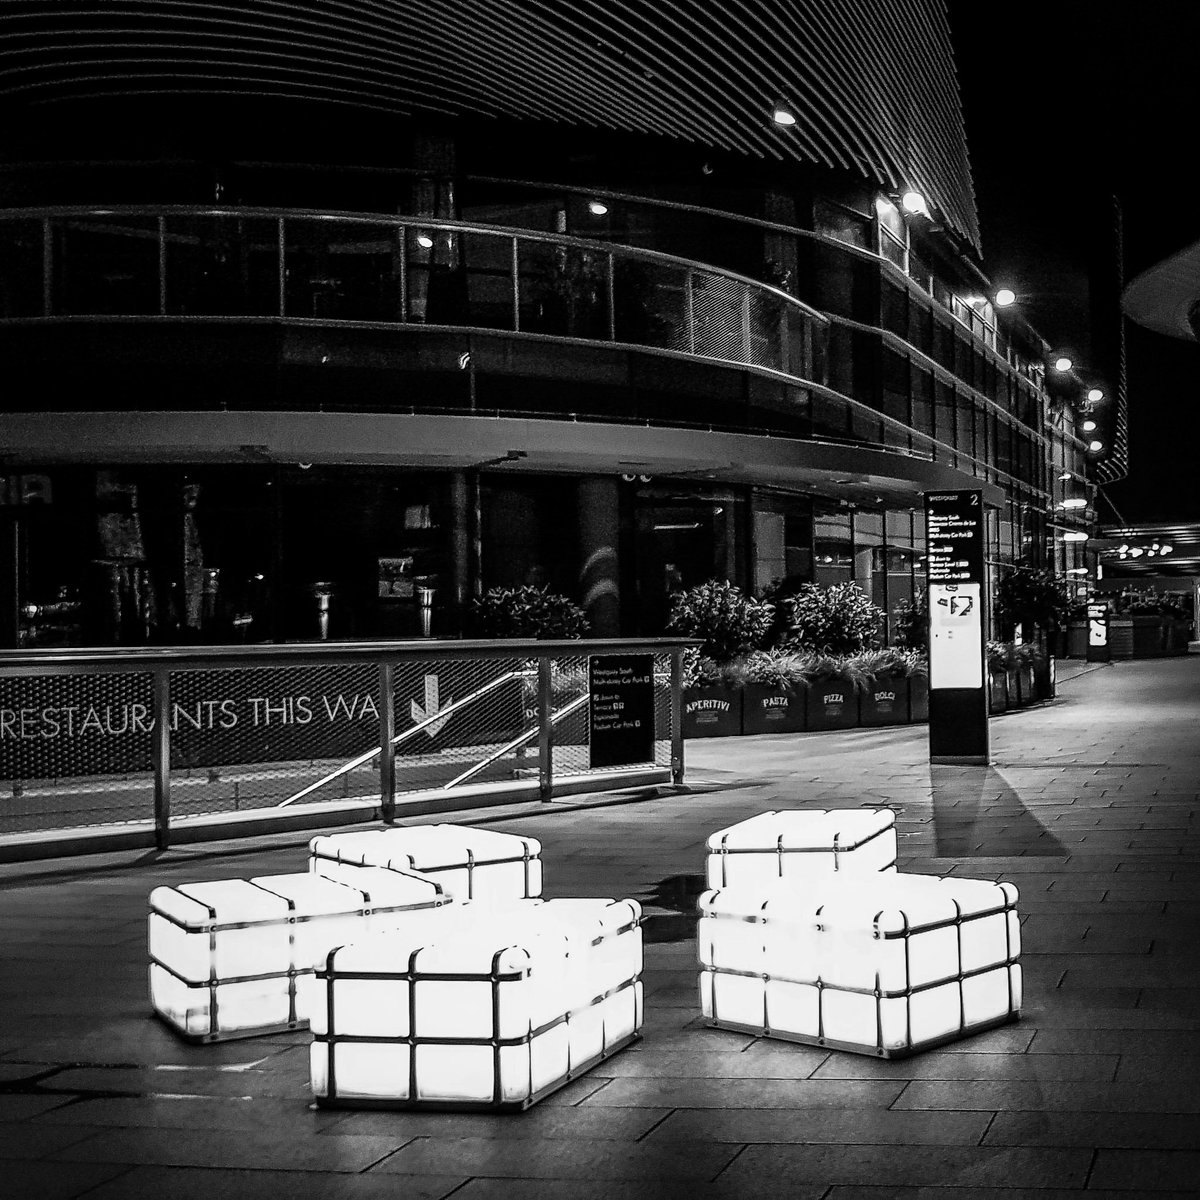 West Quay this morning. @SeeSouthampton @GreaterSoton